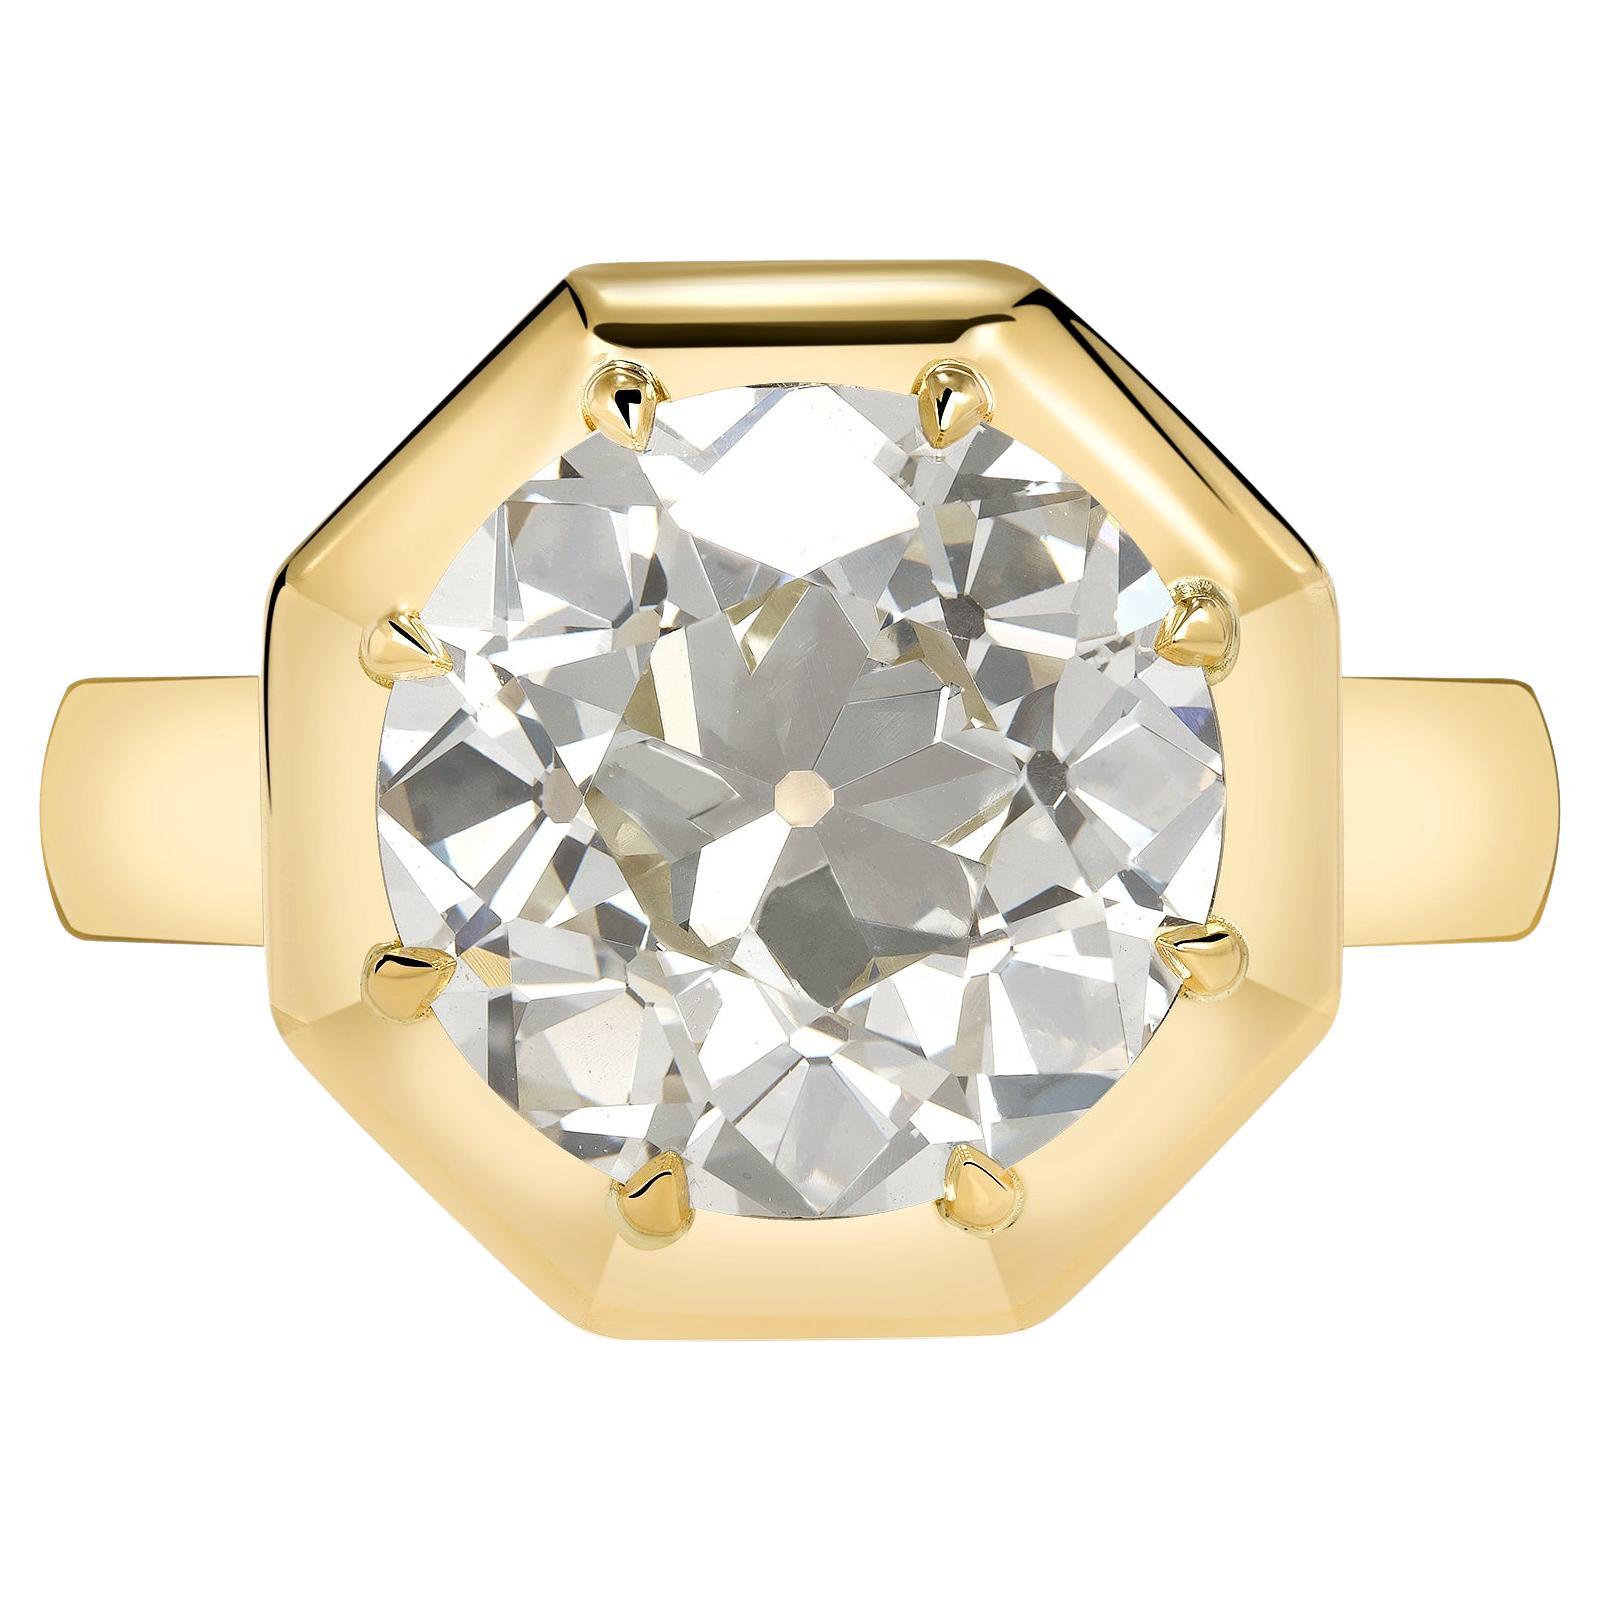 Handcrafted Lola Old European Cut Diamond Ring by Single Stone For Sale